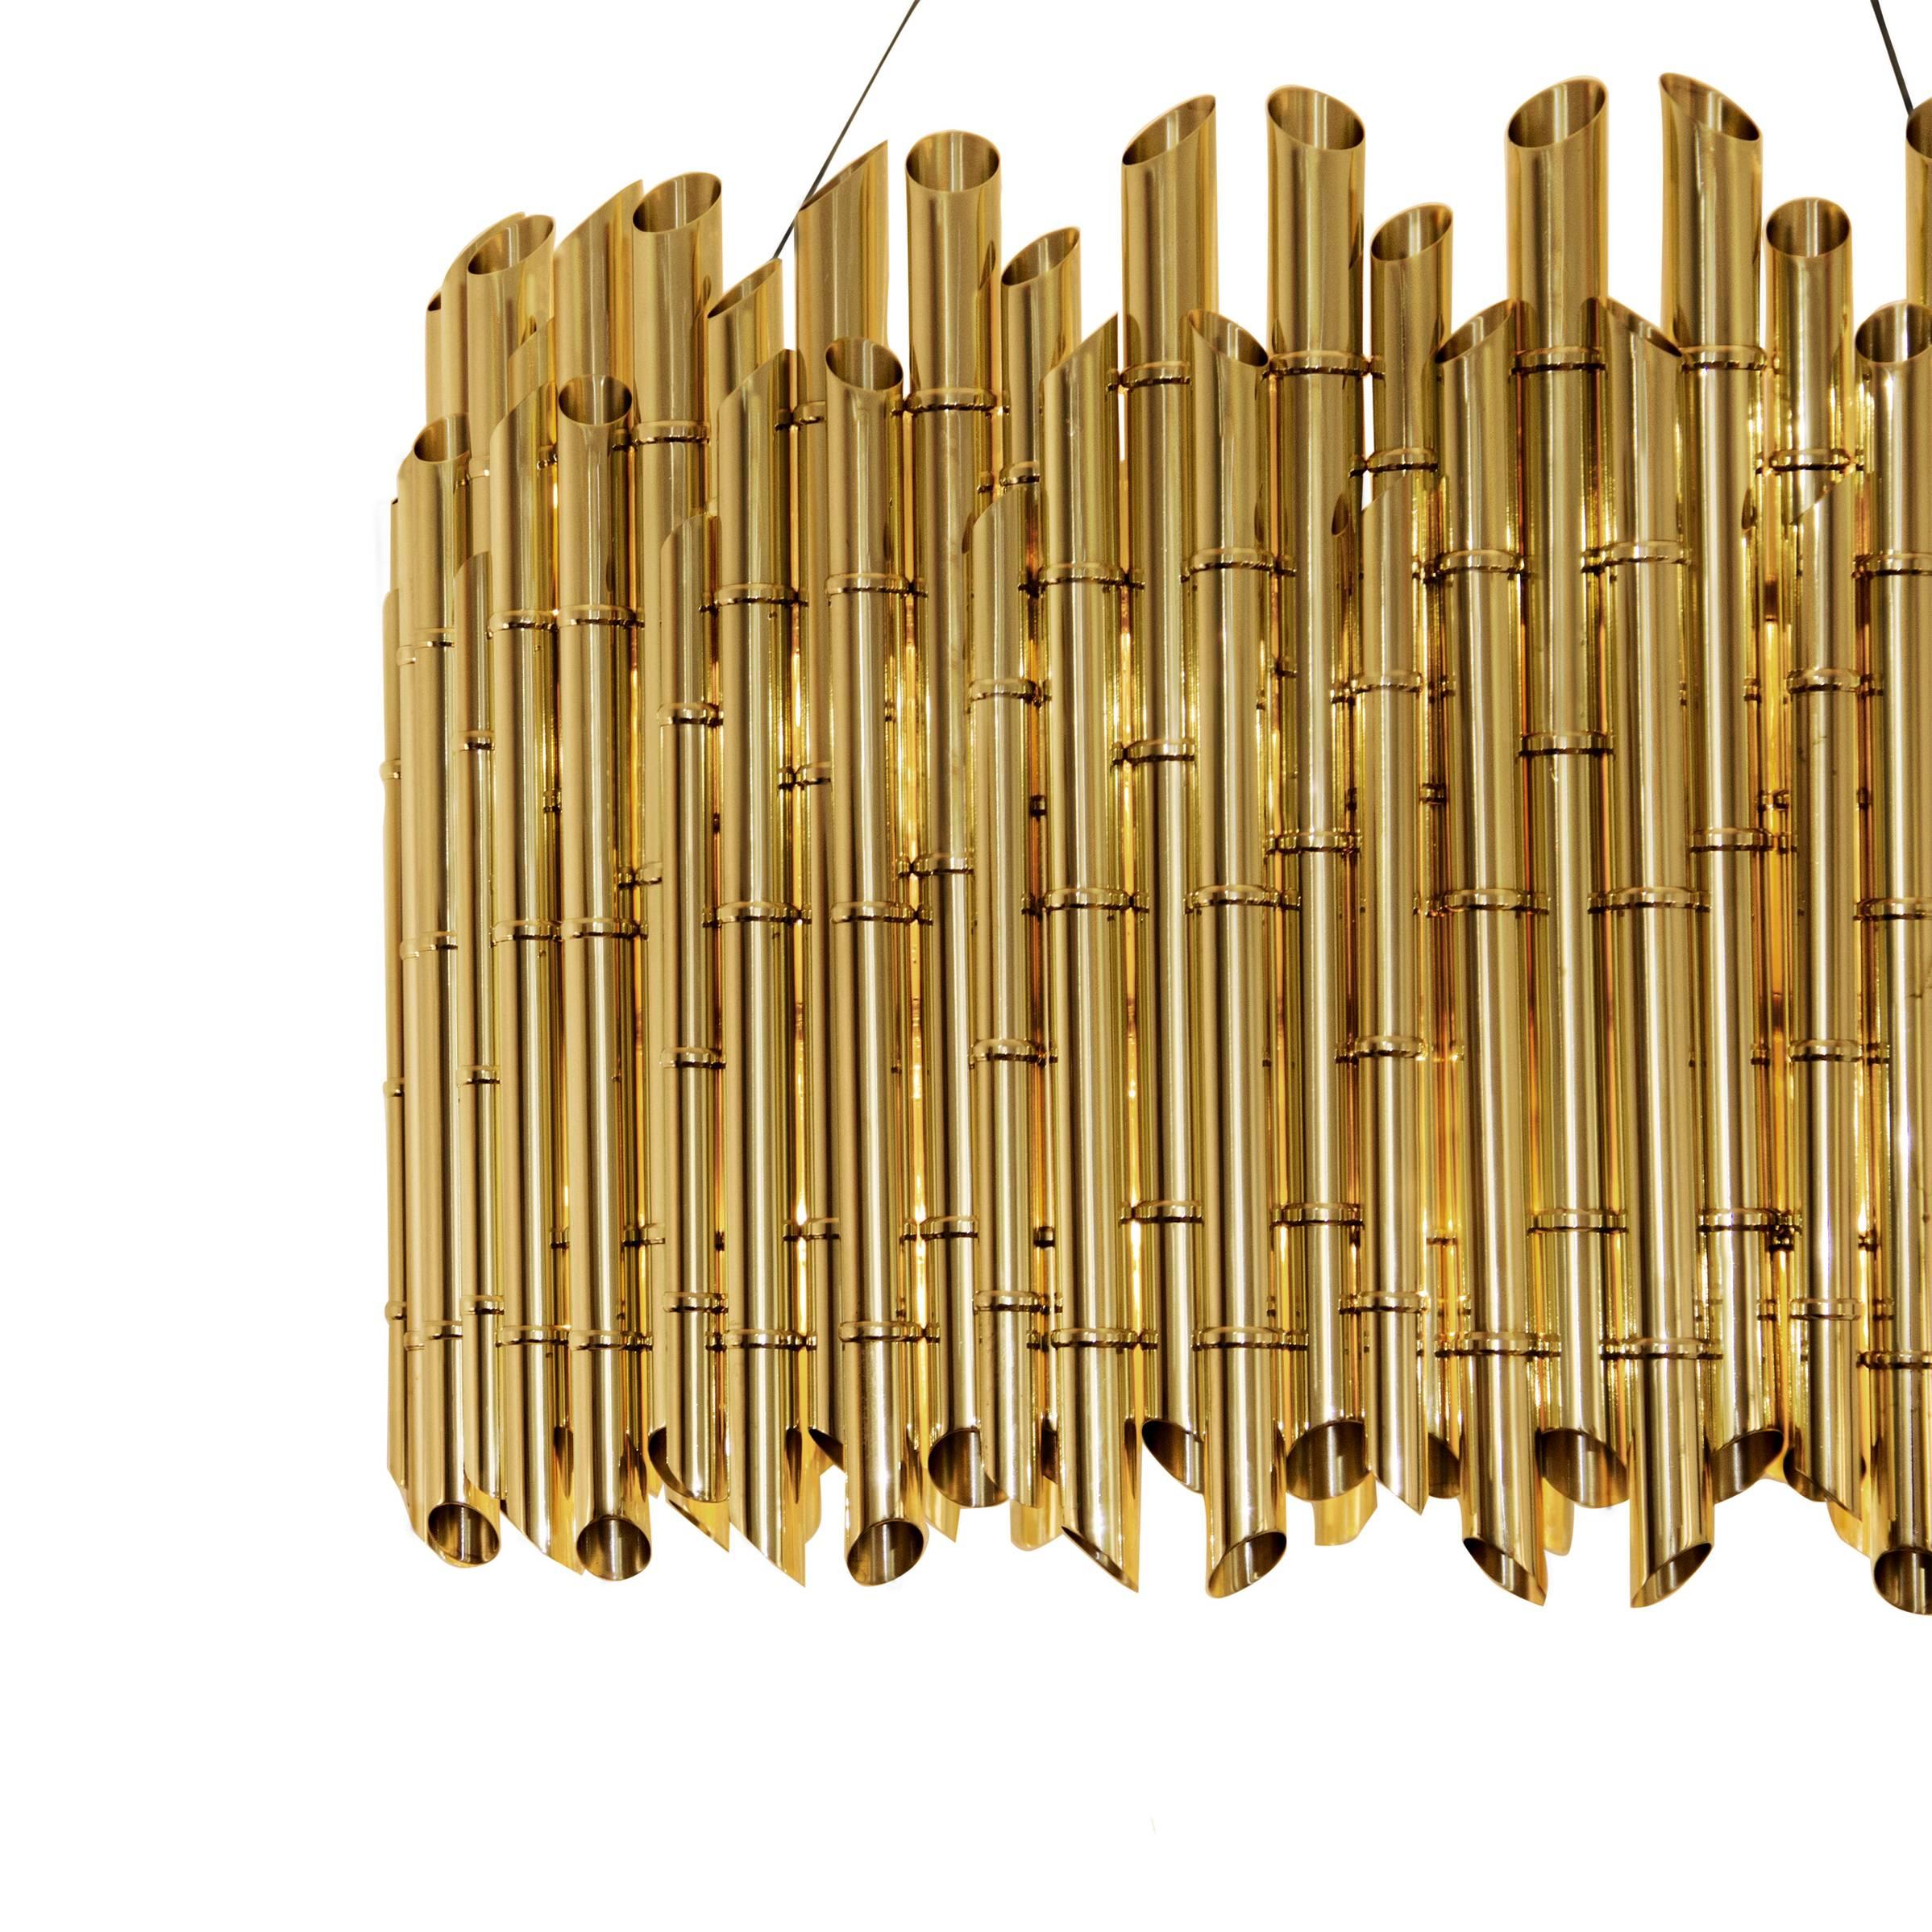 Bamboo Suspension in Glossy Brass In Excellent Condition For Sale In Paris, FR